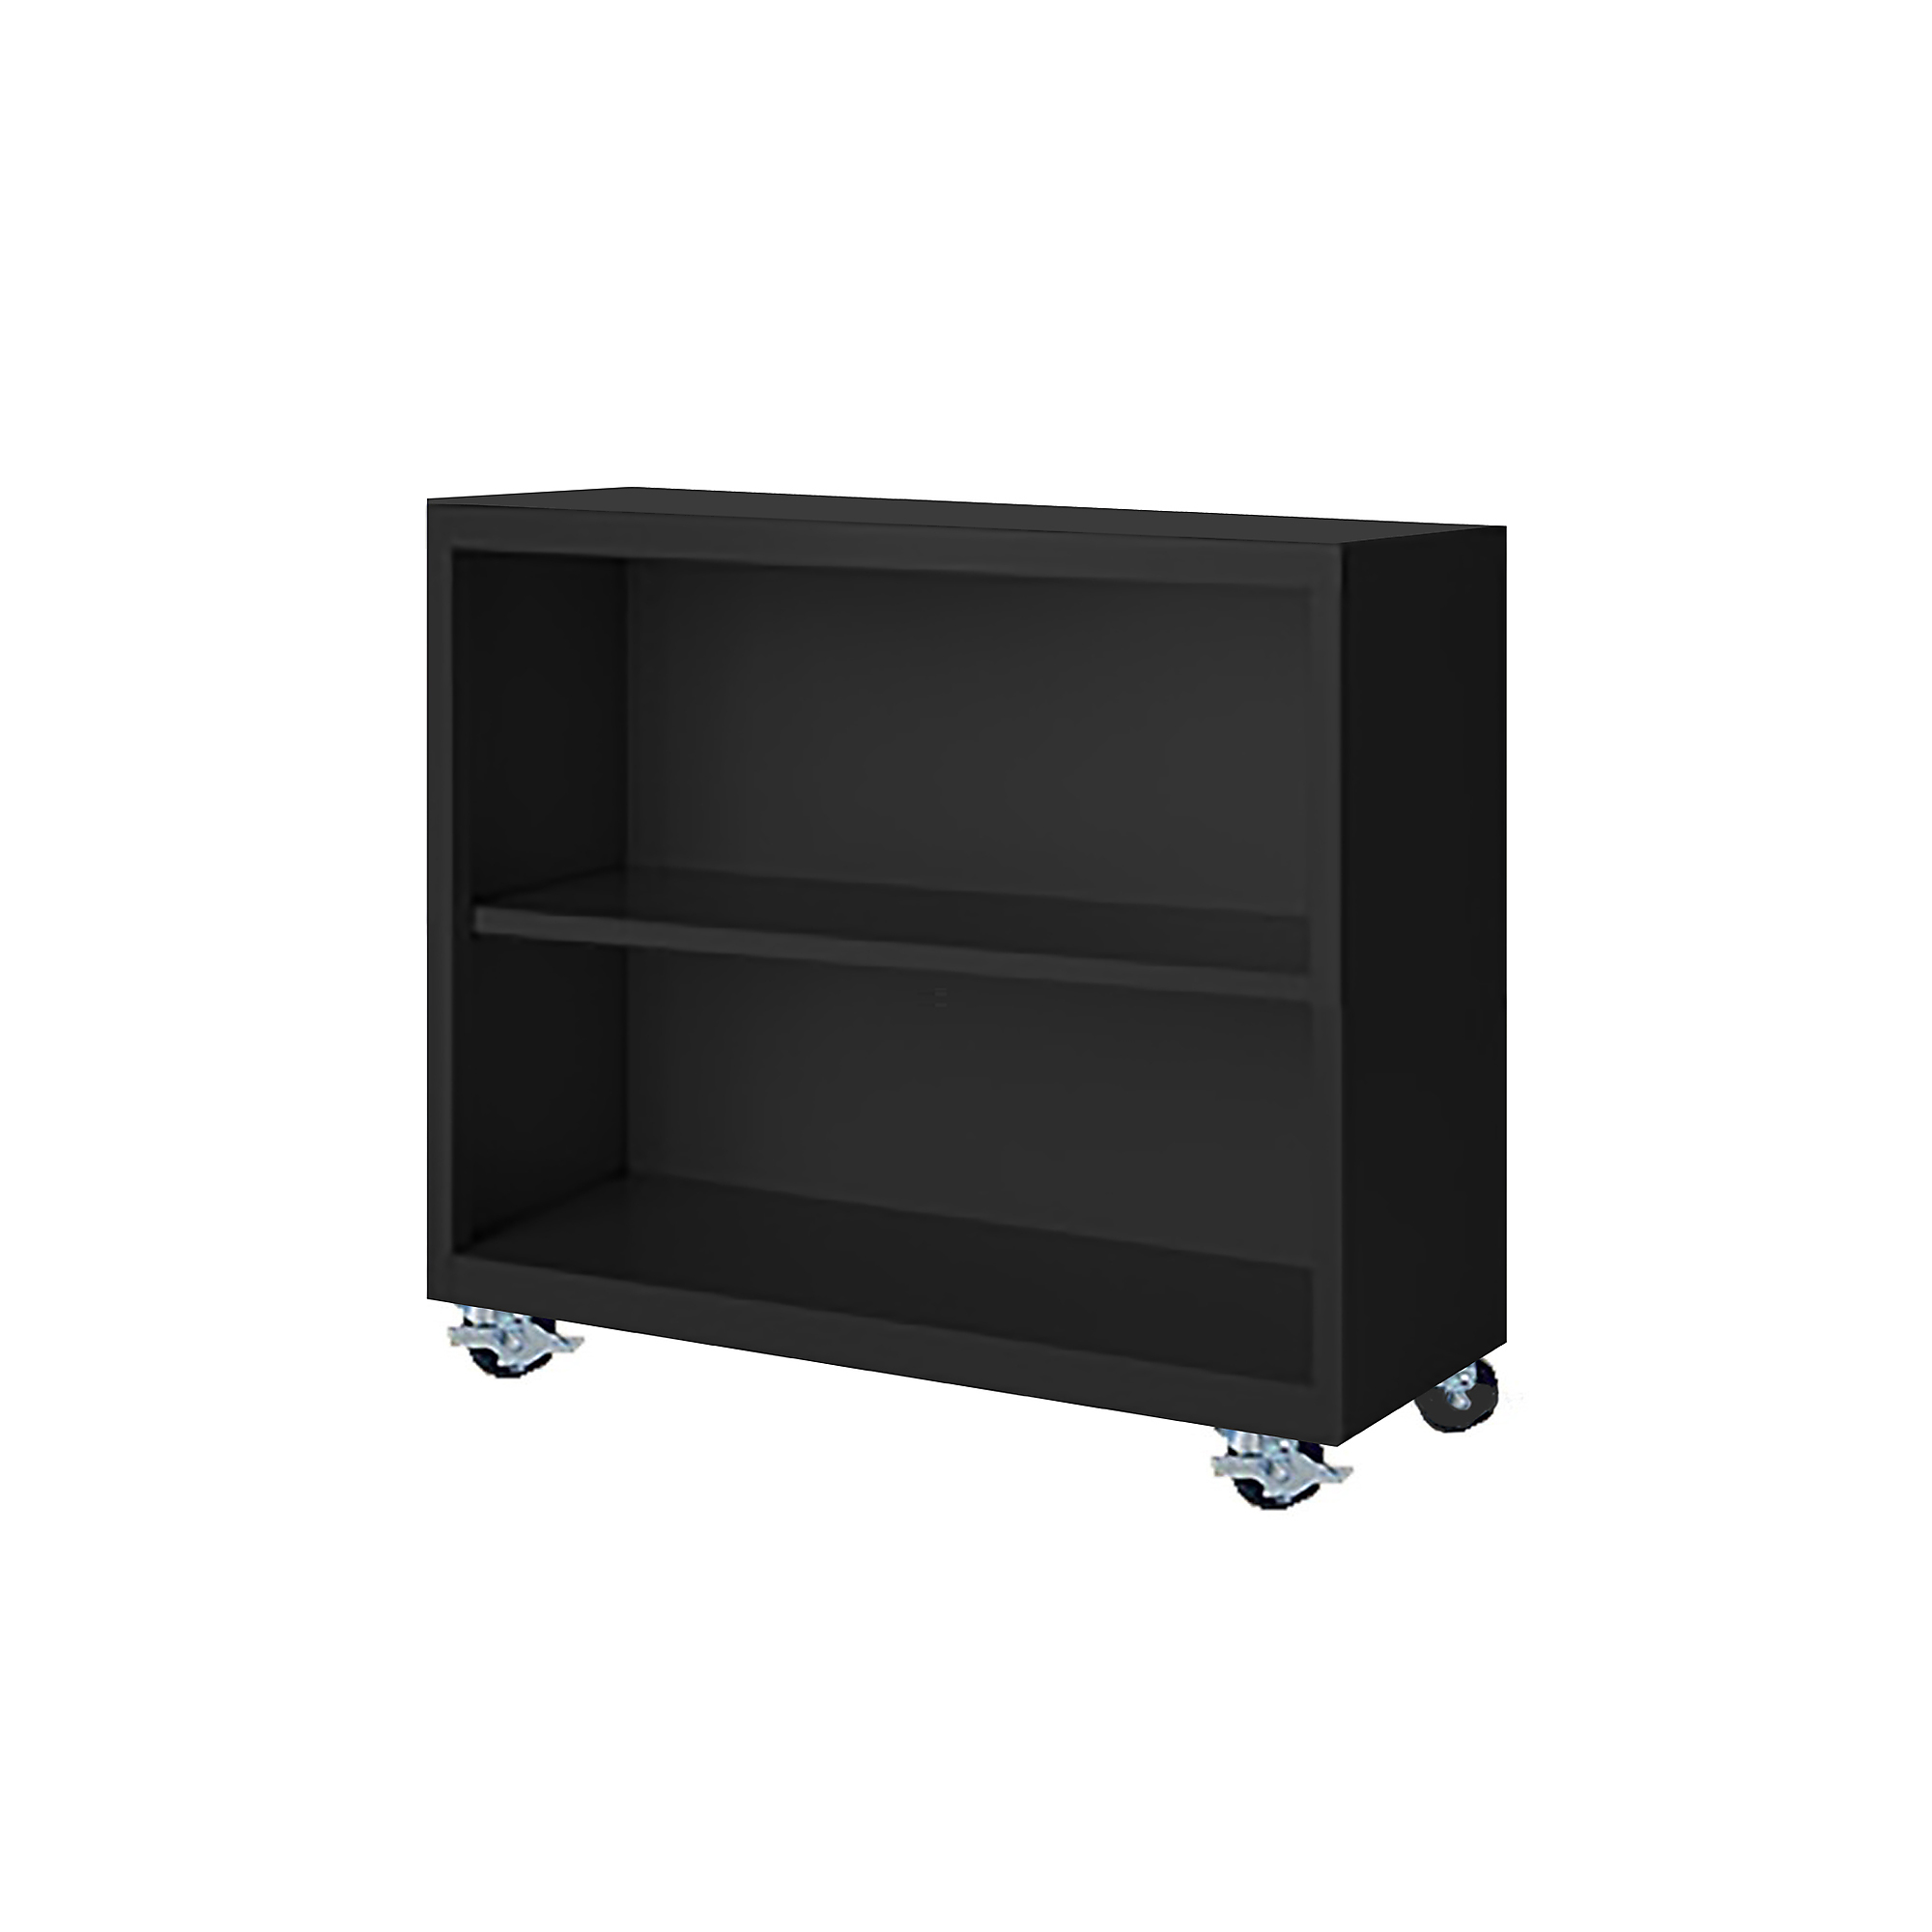 Steel Cabinets USA, 36Inchx18Inchx33Inch Black Mobile Bookcase Fully Assembled, Height 33 in, Shelves (qty.) 2, Material Steel, Model MBCA-363318-B